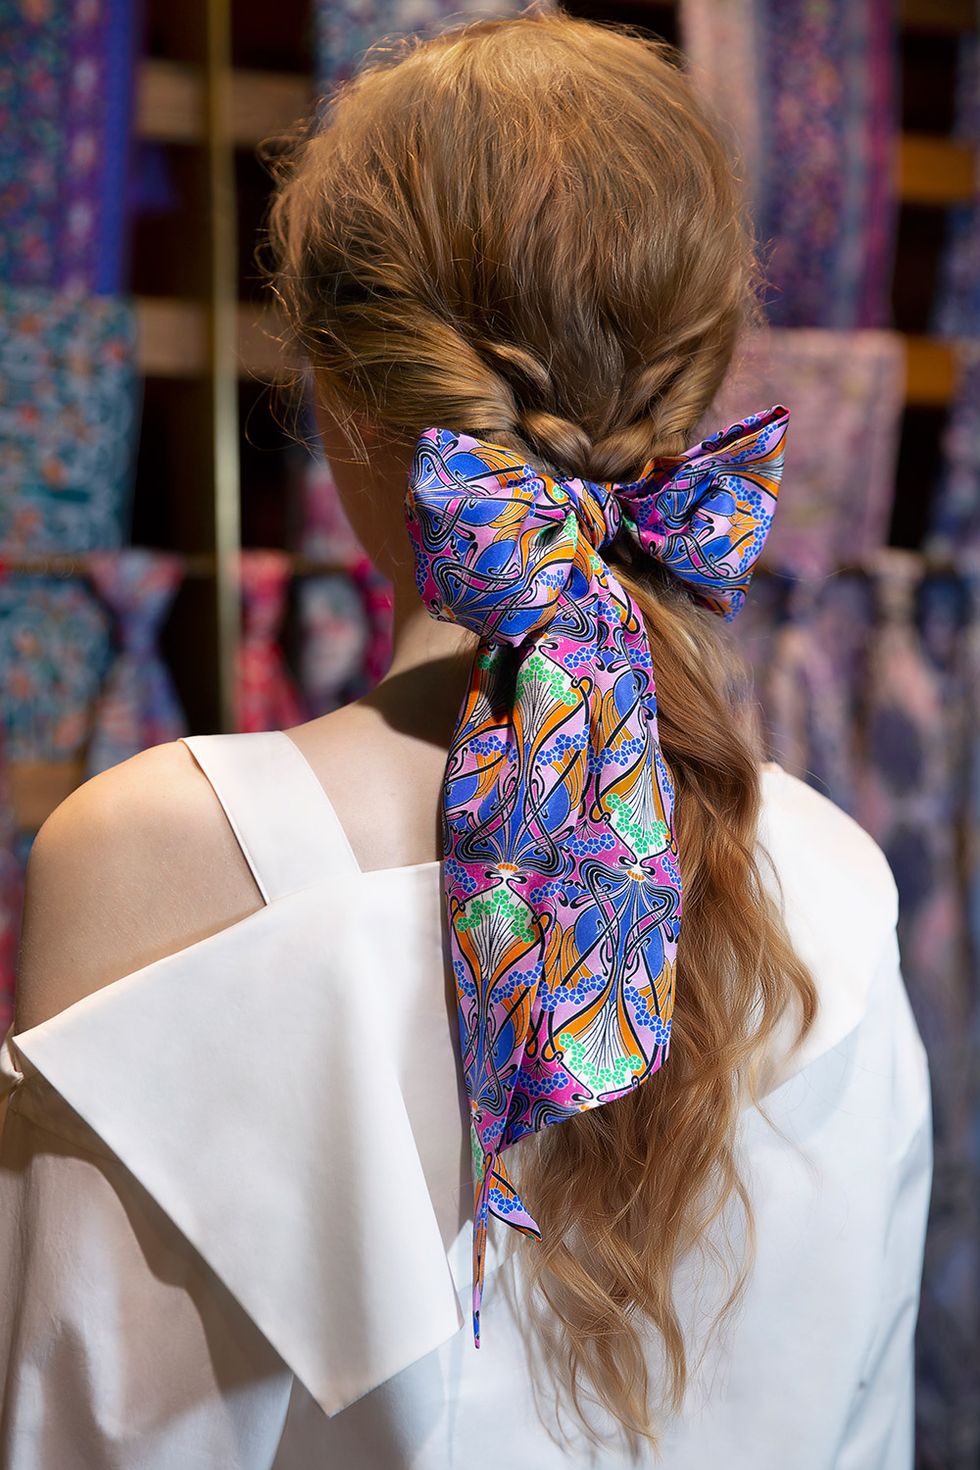 Liberty x Taylor Taylor scarf hair styling - Liberty print hair accessories